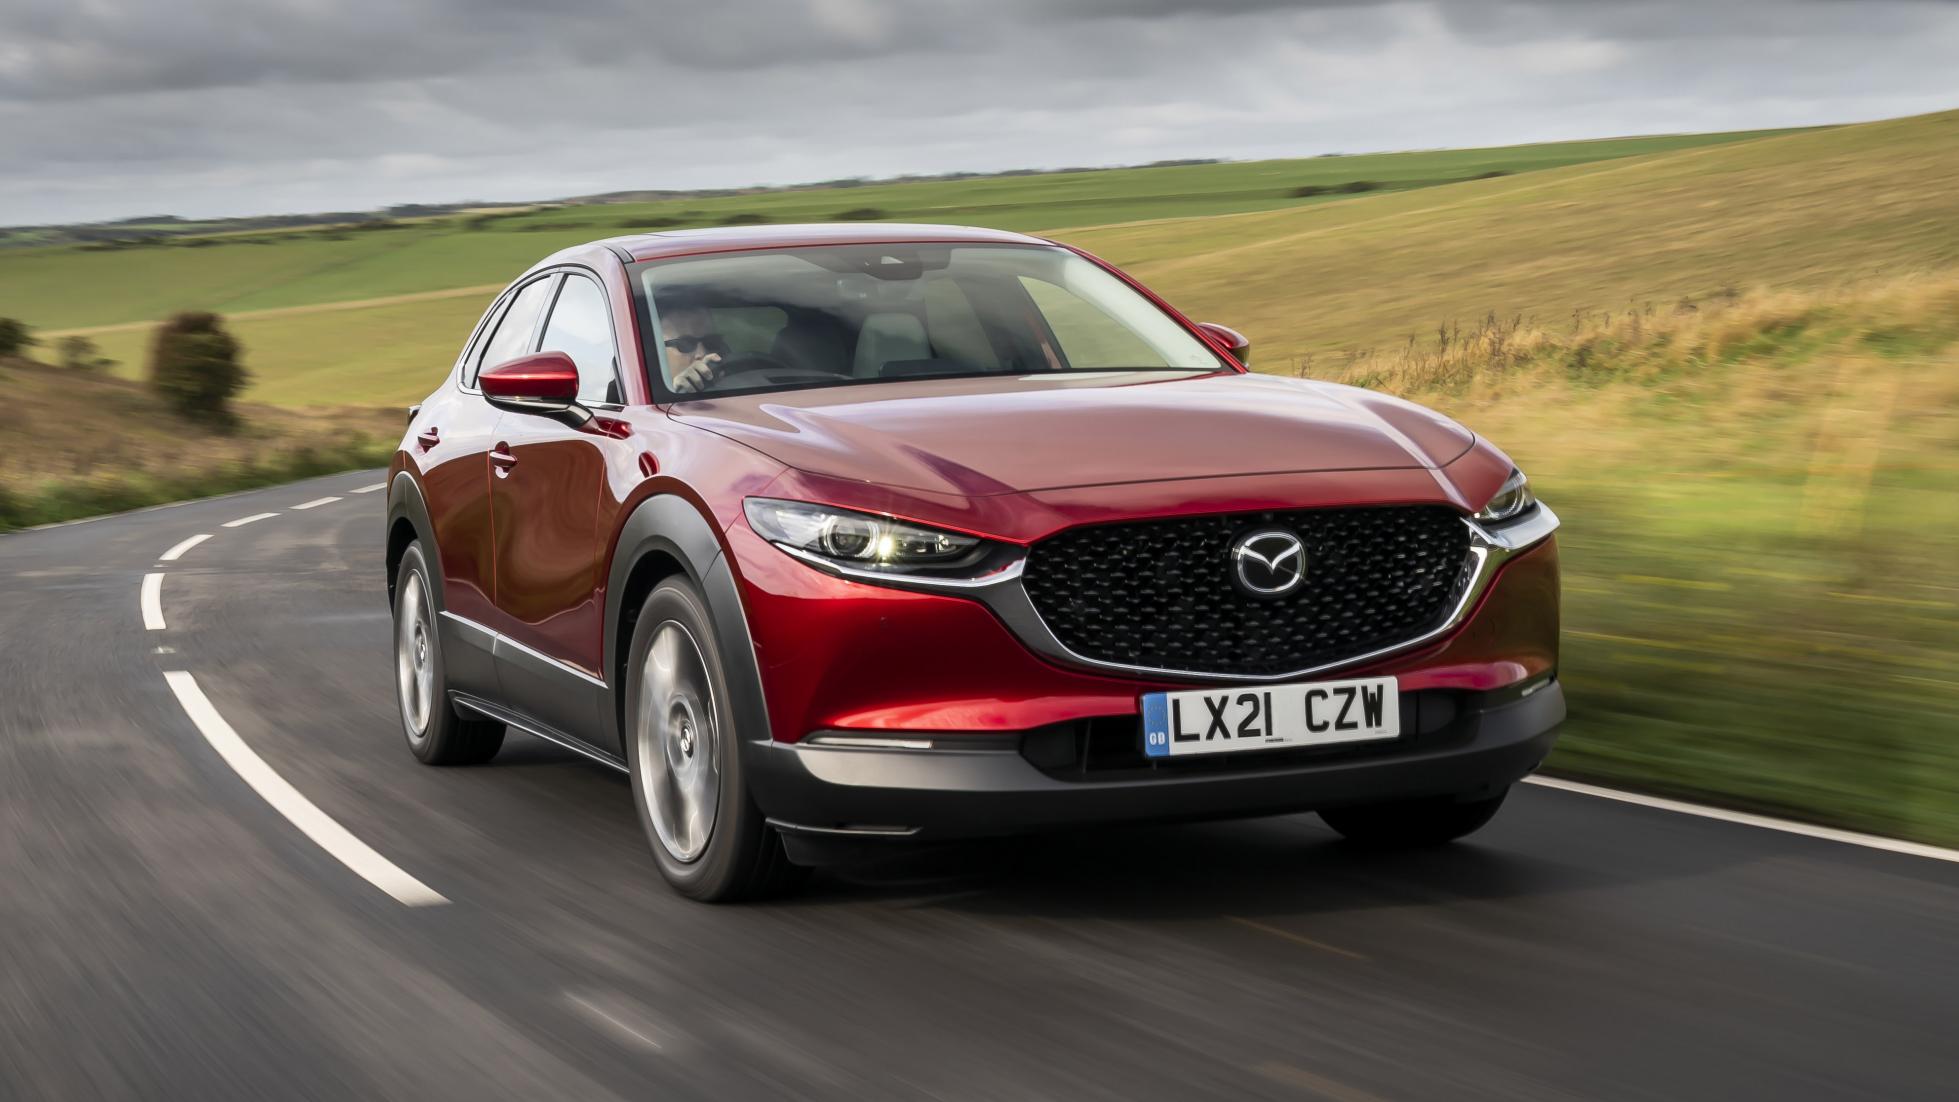 Gear on Twitter: "Mazda to plug the gap between its CX-3 and CX-5 with another updated crossover. The Top Gear car review: 2021 Mazda CX-30 → https://t.co/6AkKTt09X4 https://t.co/Rbl3etp3BW" /